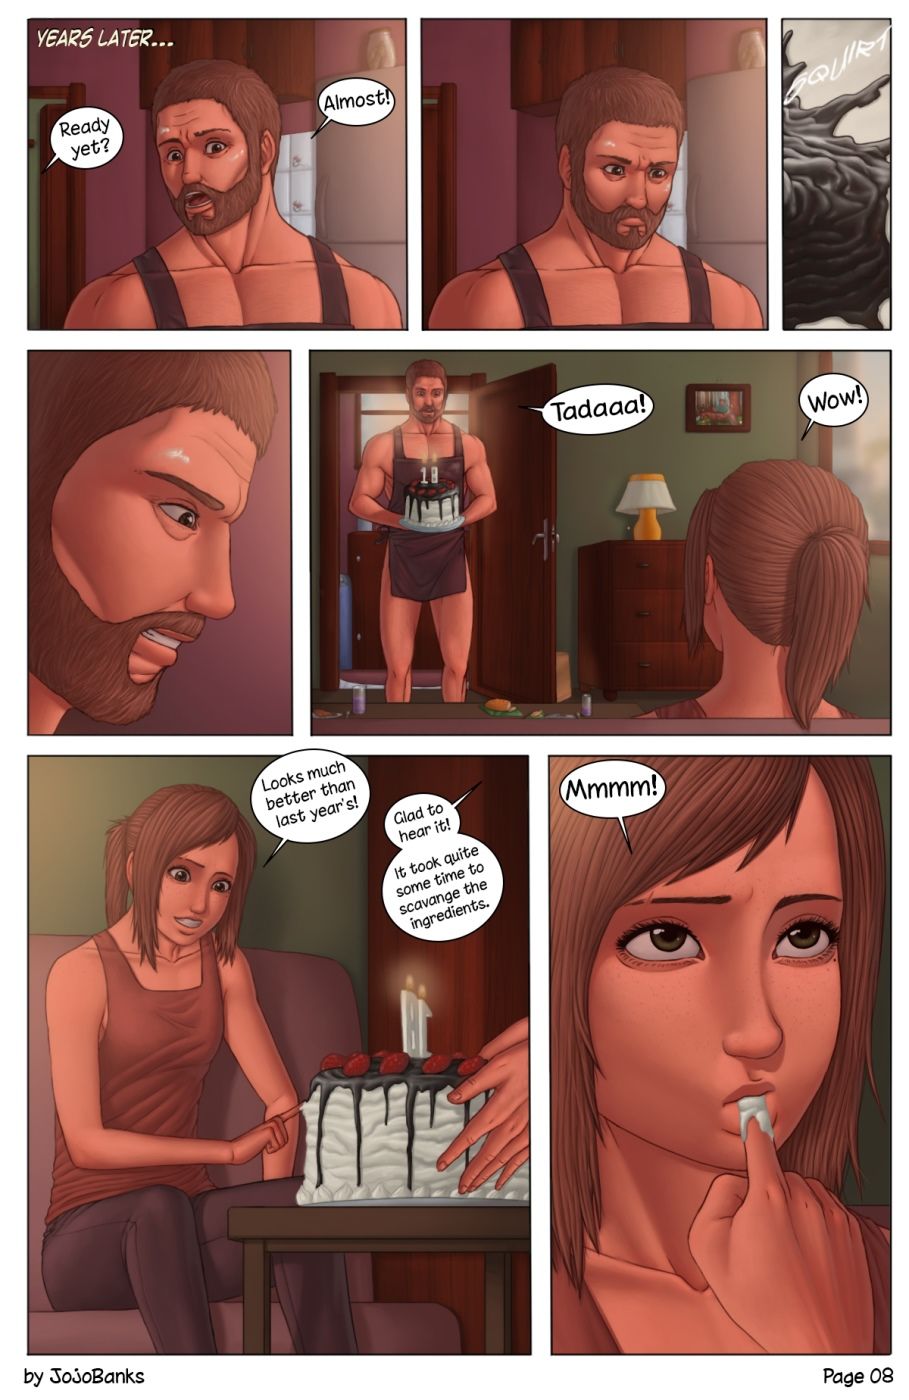 The Last of Our Desires - Last of Us page 9